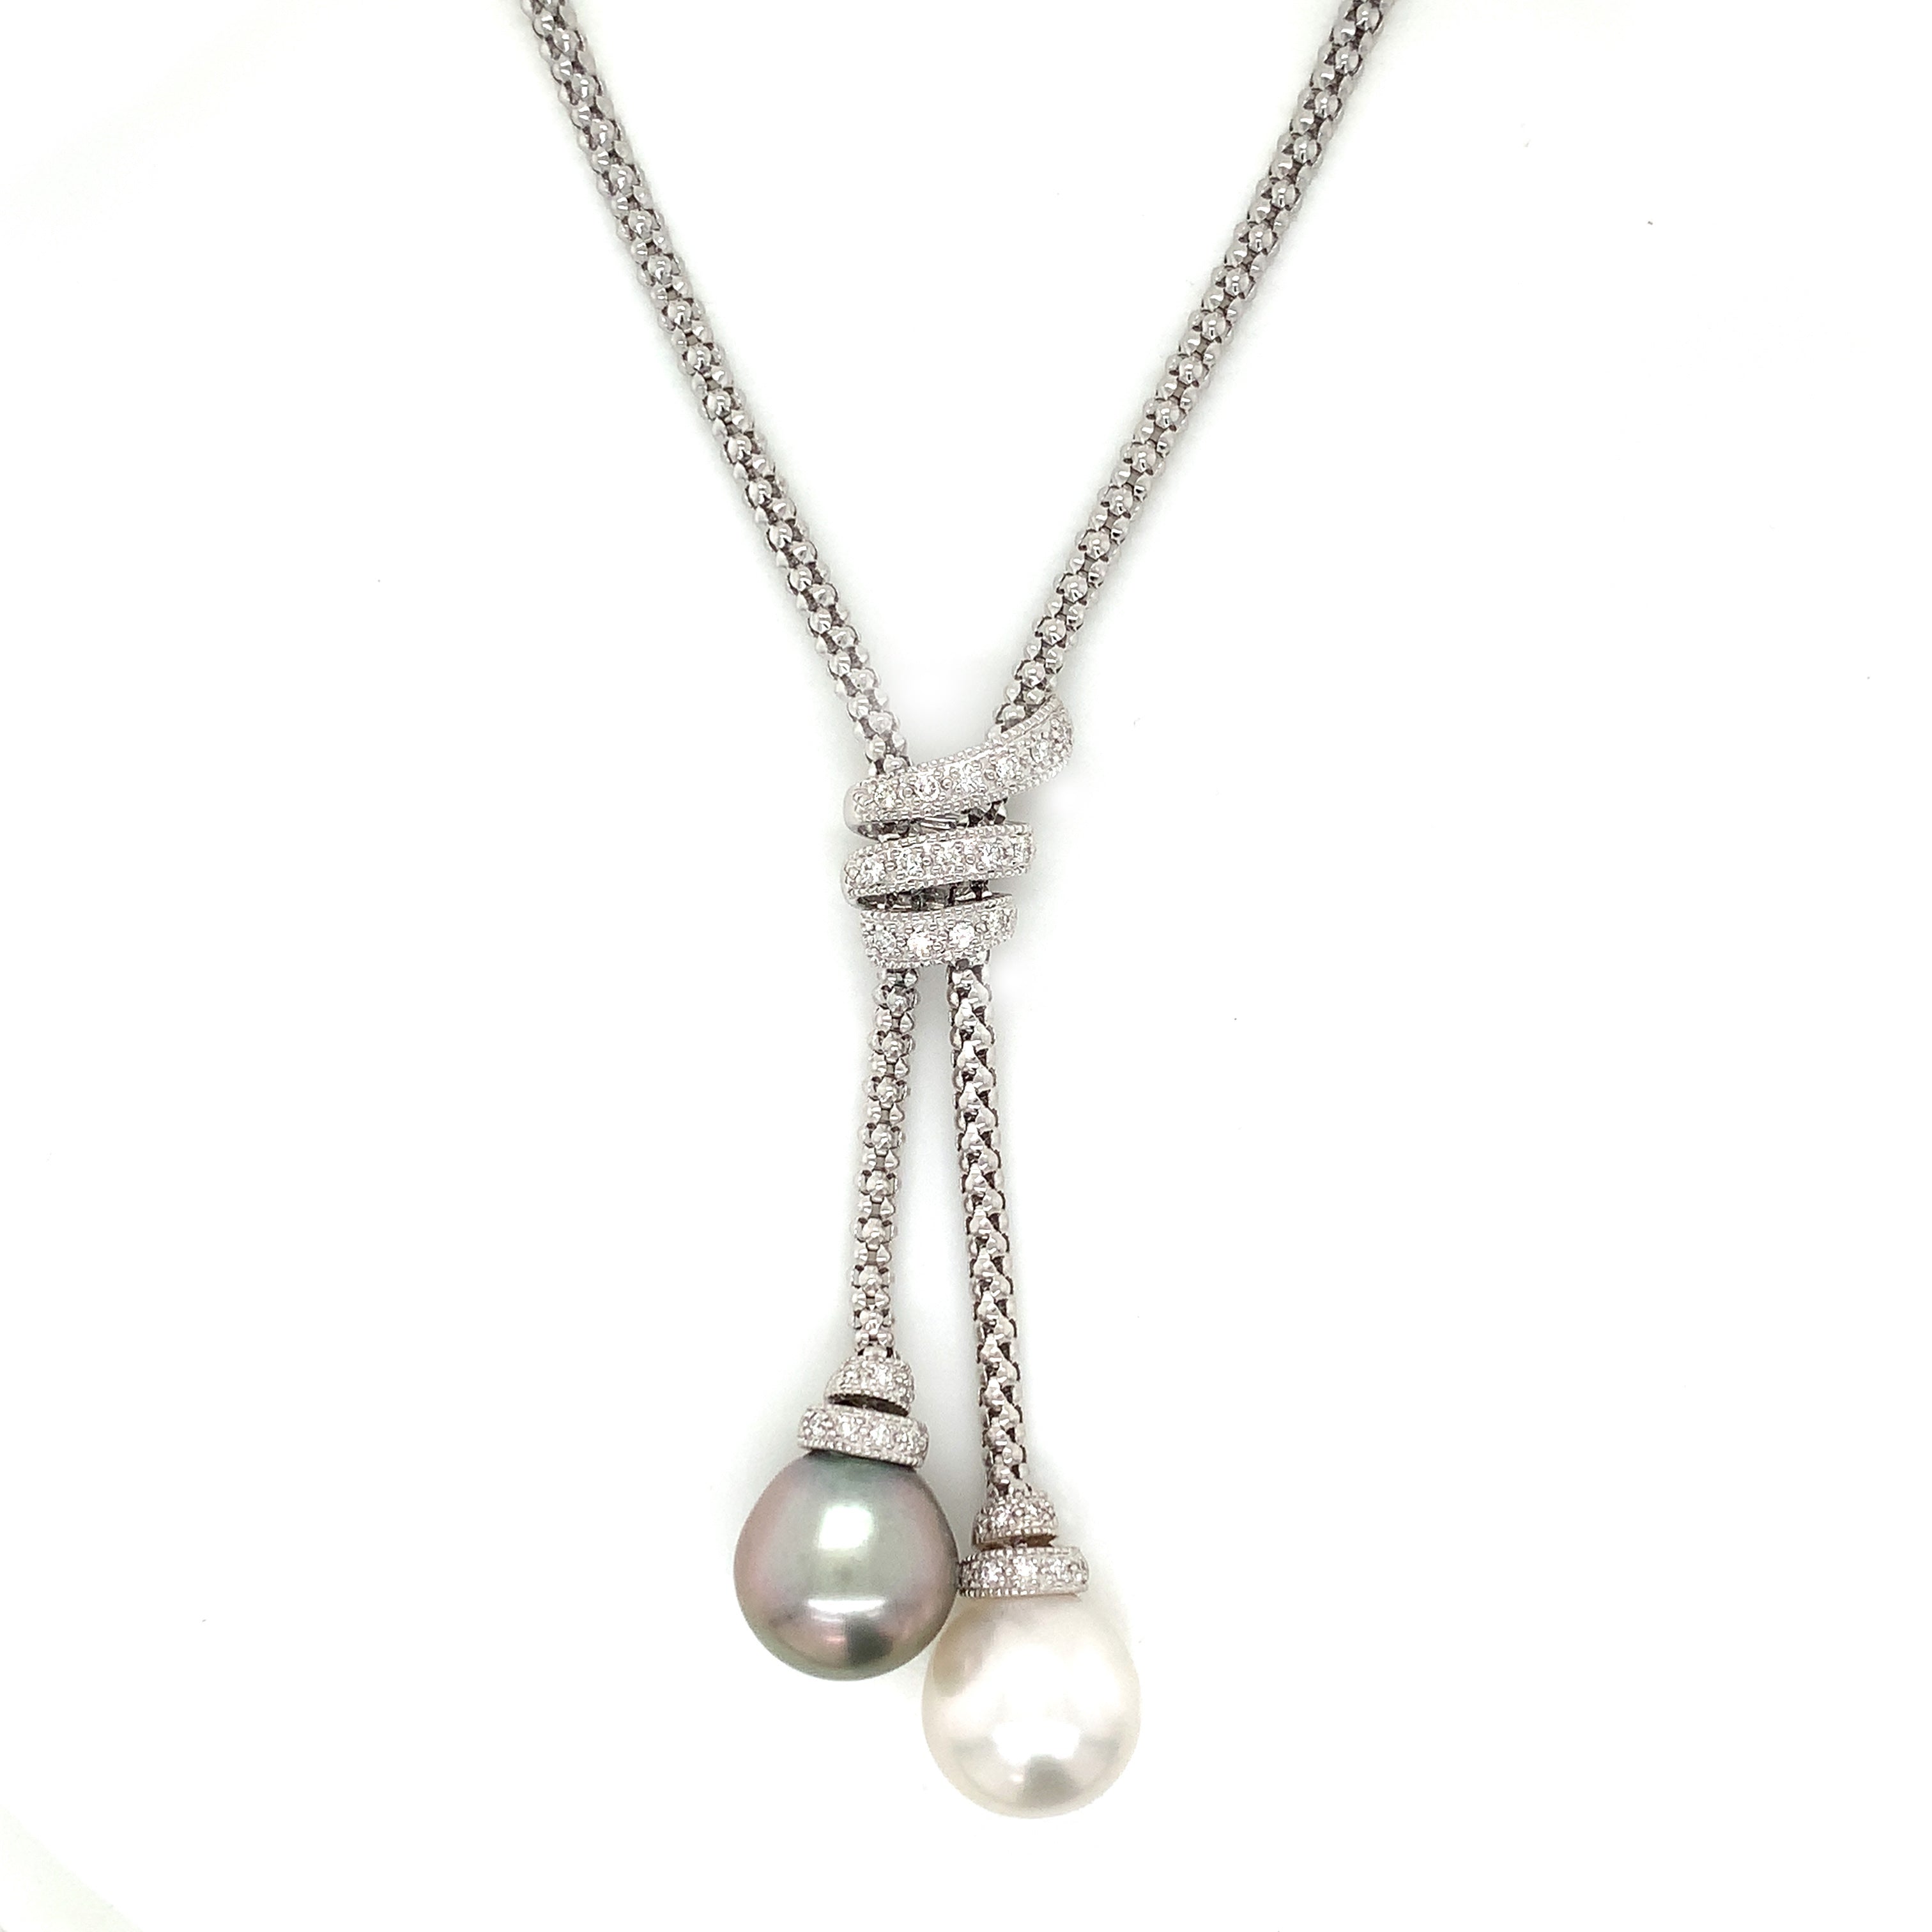 DOUBLE PEARL NECKLACE